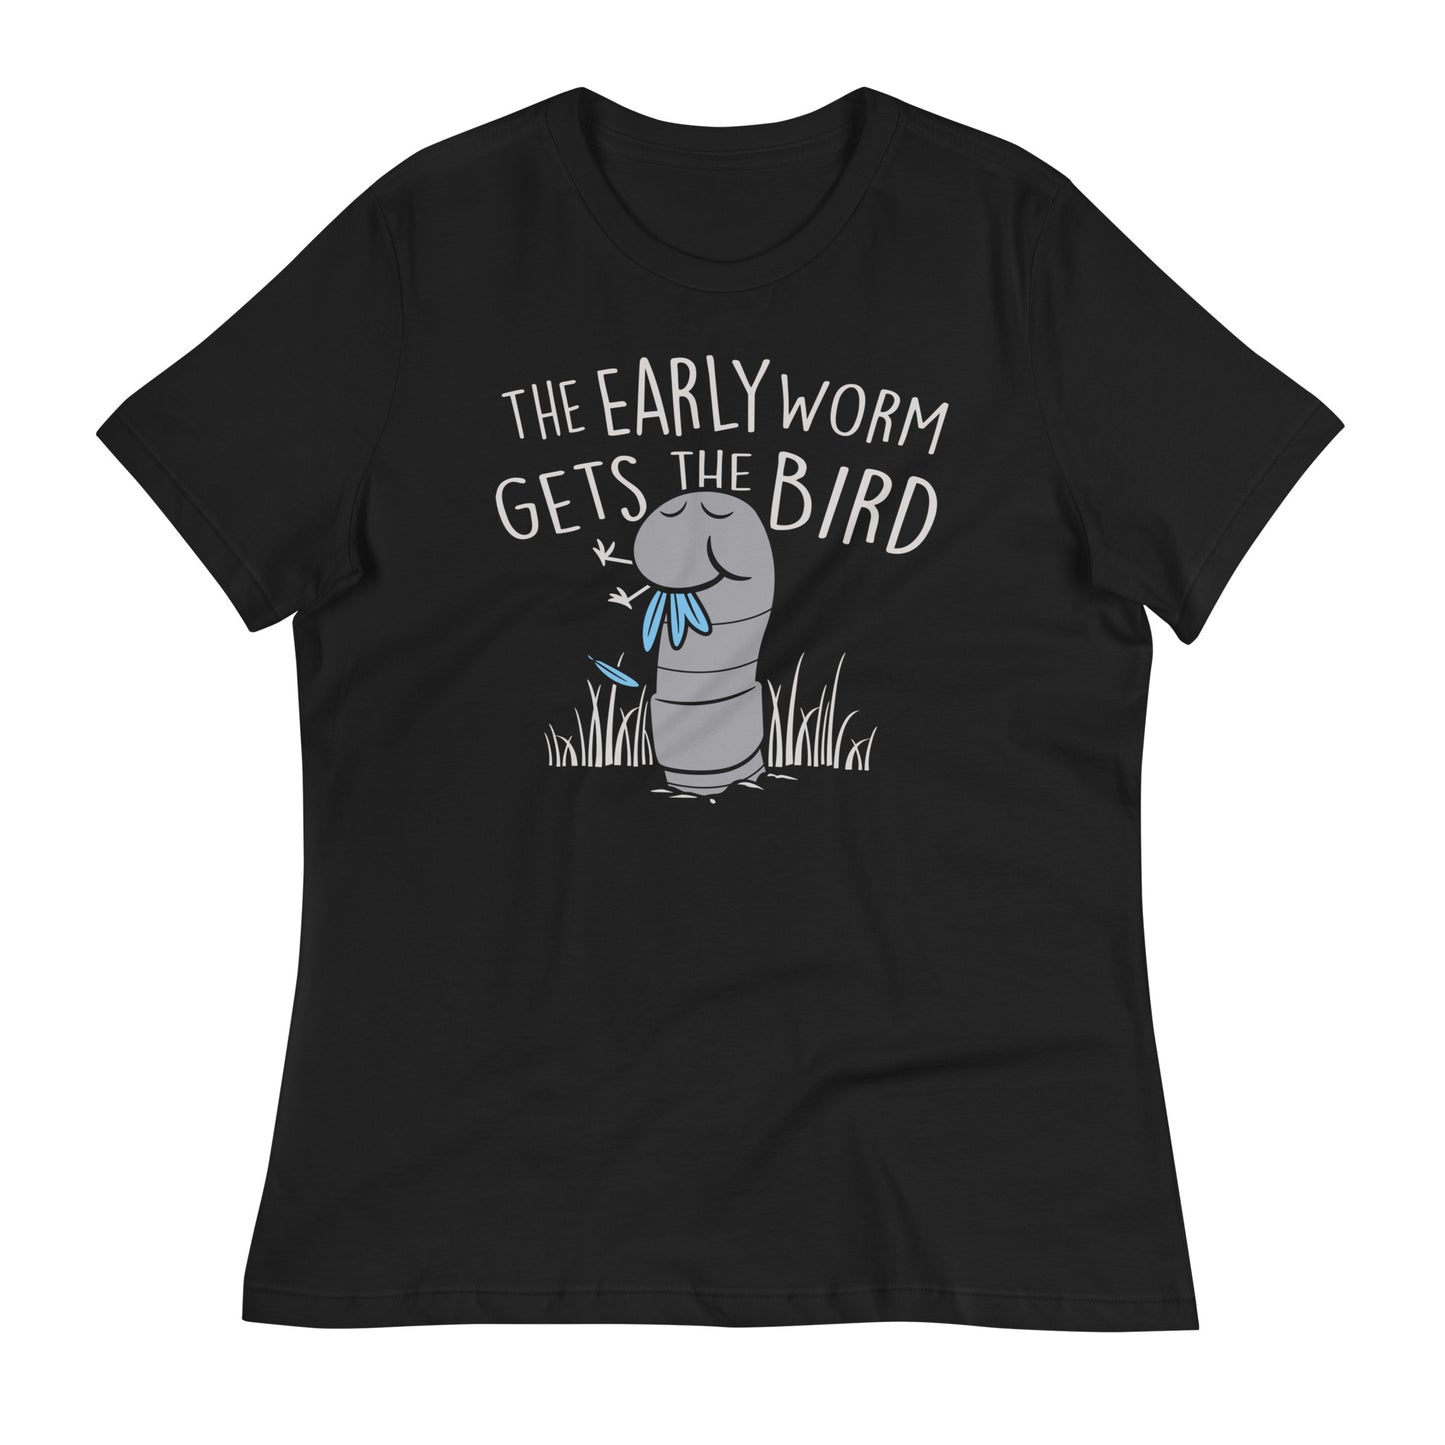 The Early Worm Gets The Bird Women's Signature Tee